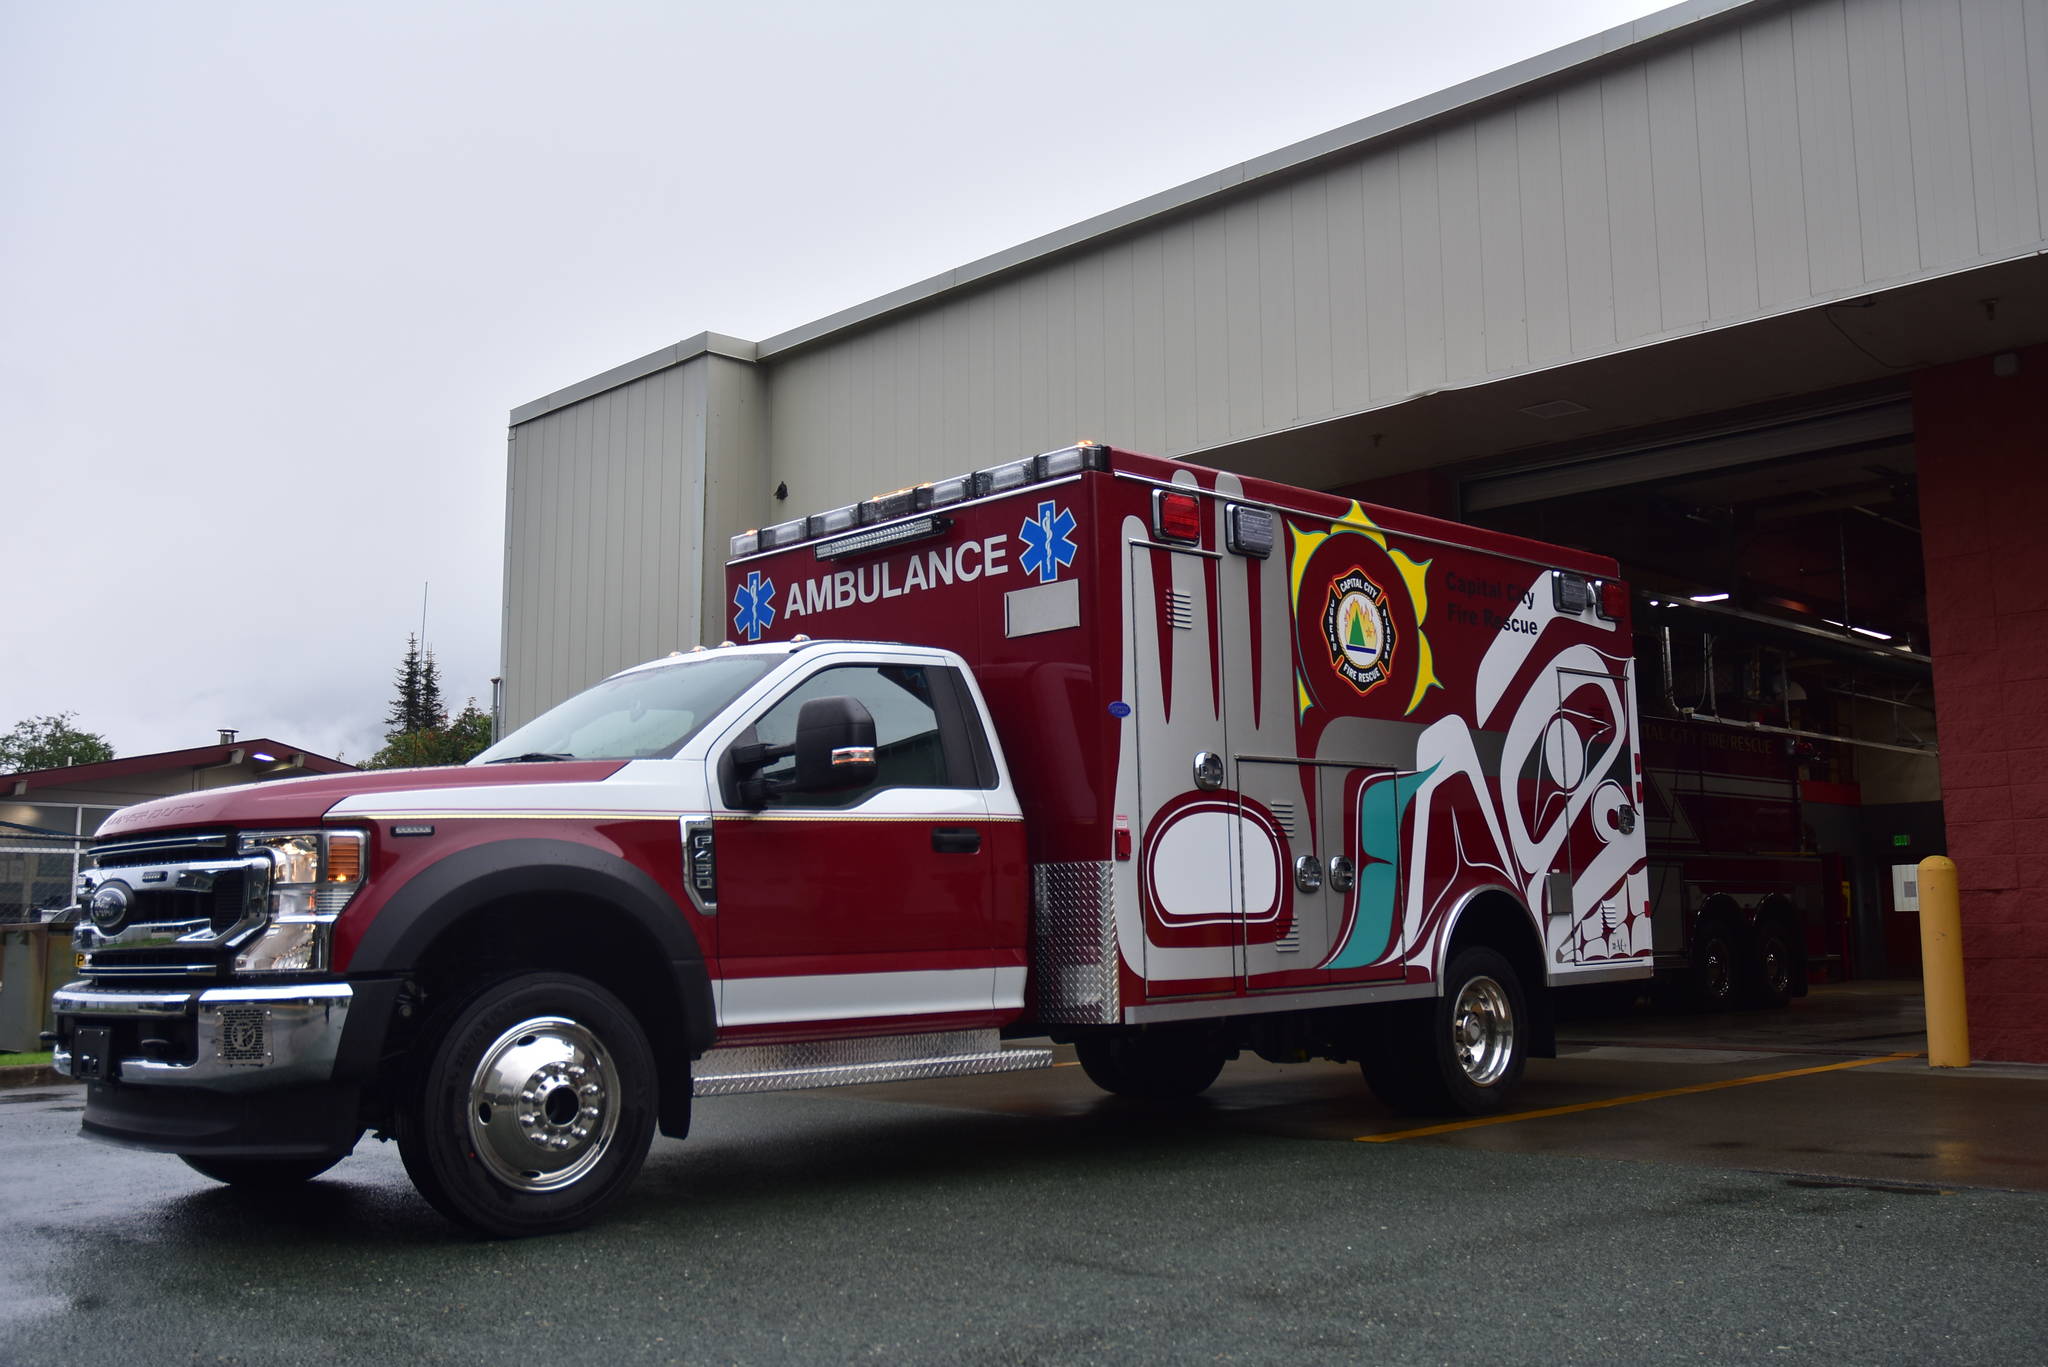 Peter Segall / Juneau Empire                                Capital City Fire/Rescue recently worked with Southeast Alaska artists and companies to decorate a new ambulance. This side was designed by Mary Goddard, an Alaska Native artist in Sitka.